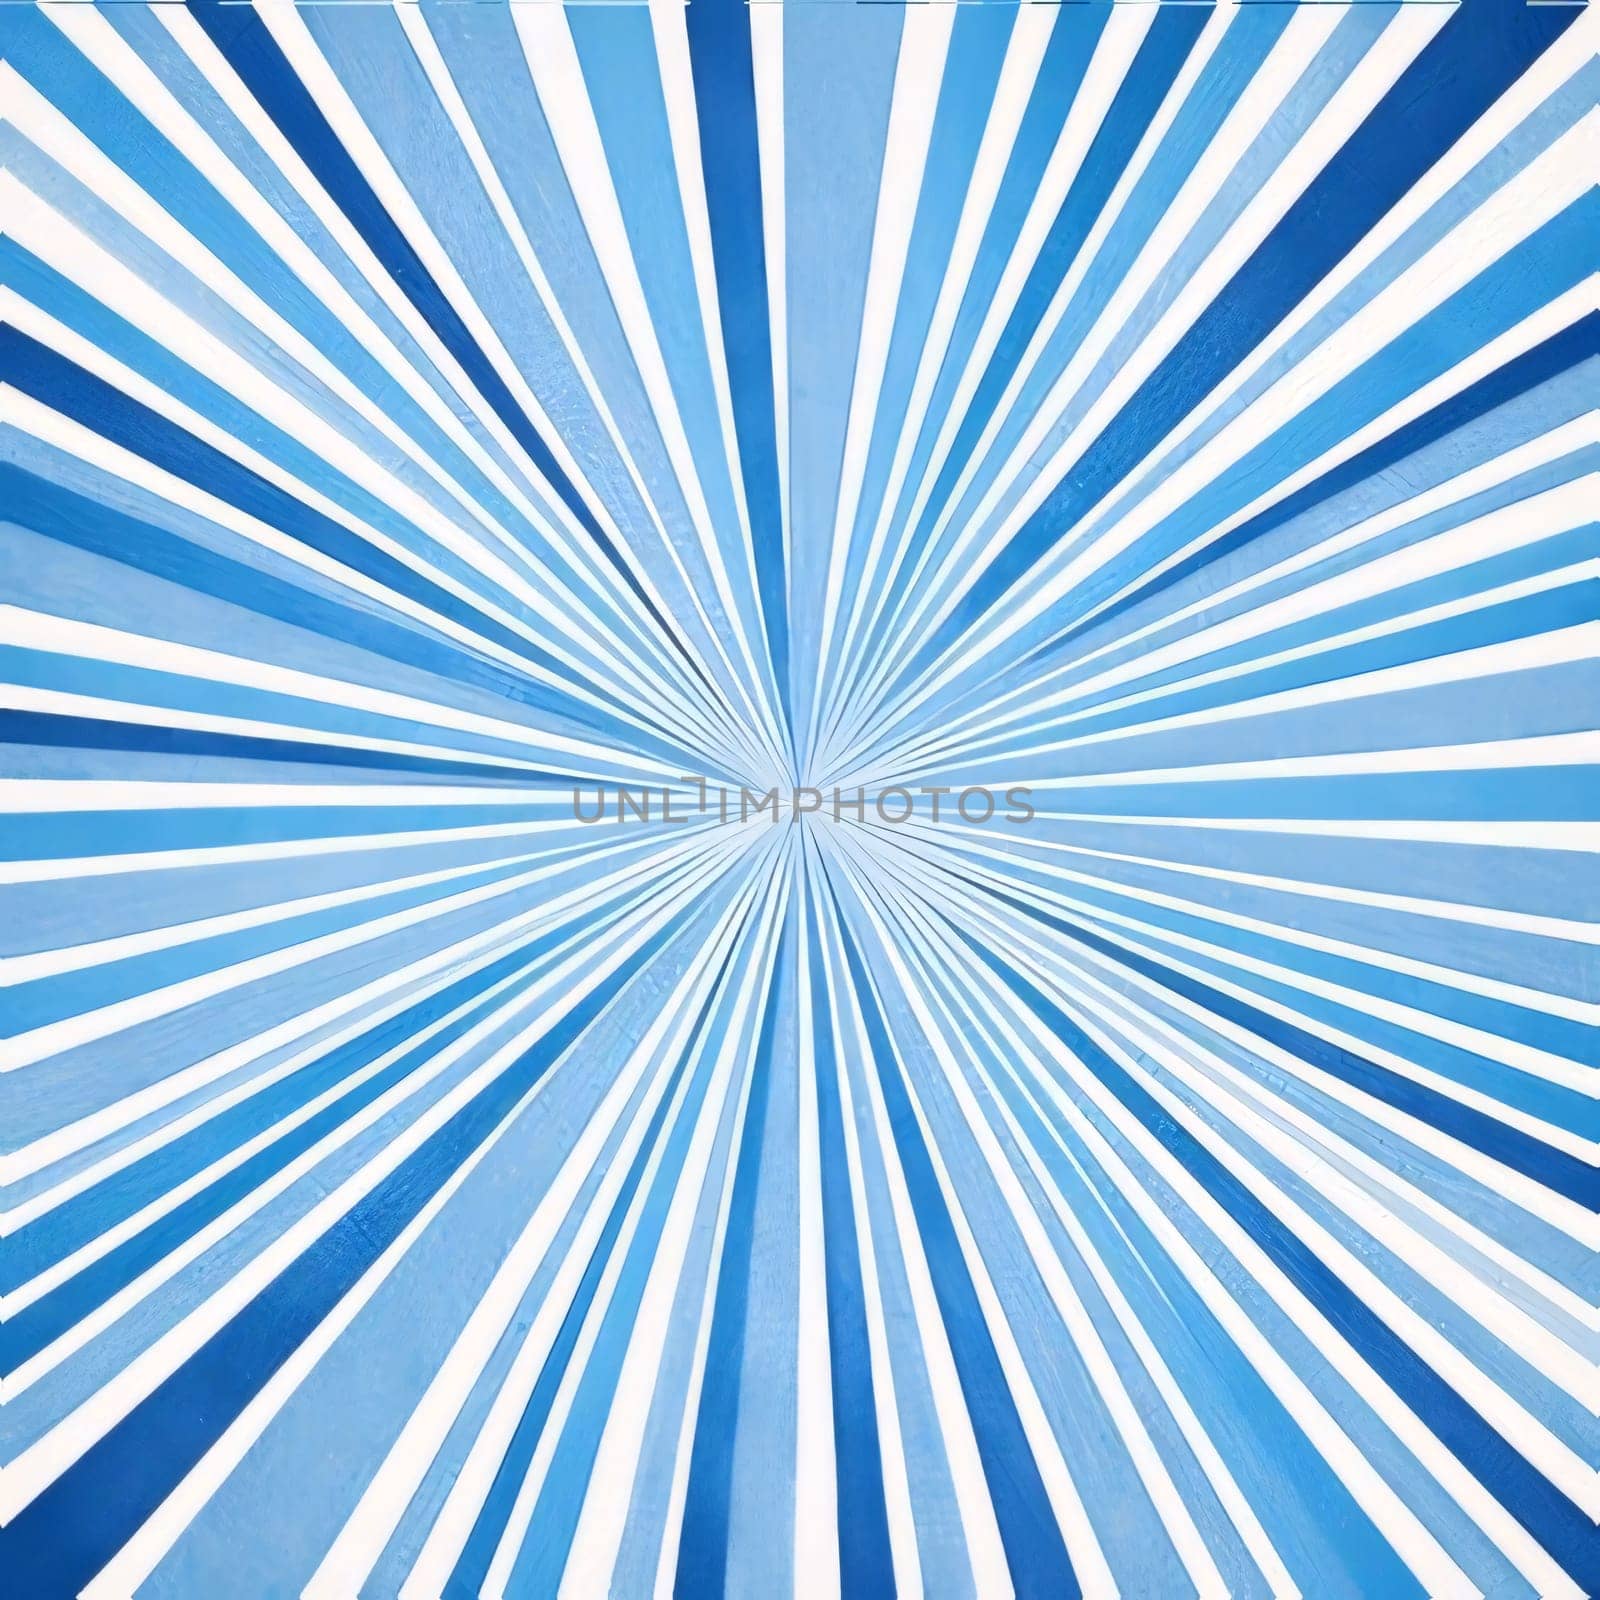 Abstract background design: Blue and white rays on a white background. Abstract background. Vector illustration.